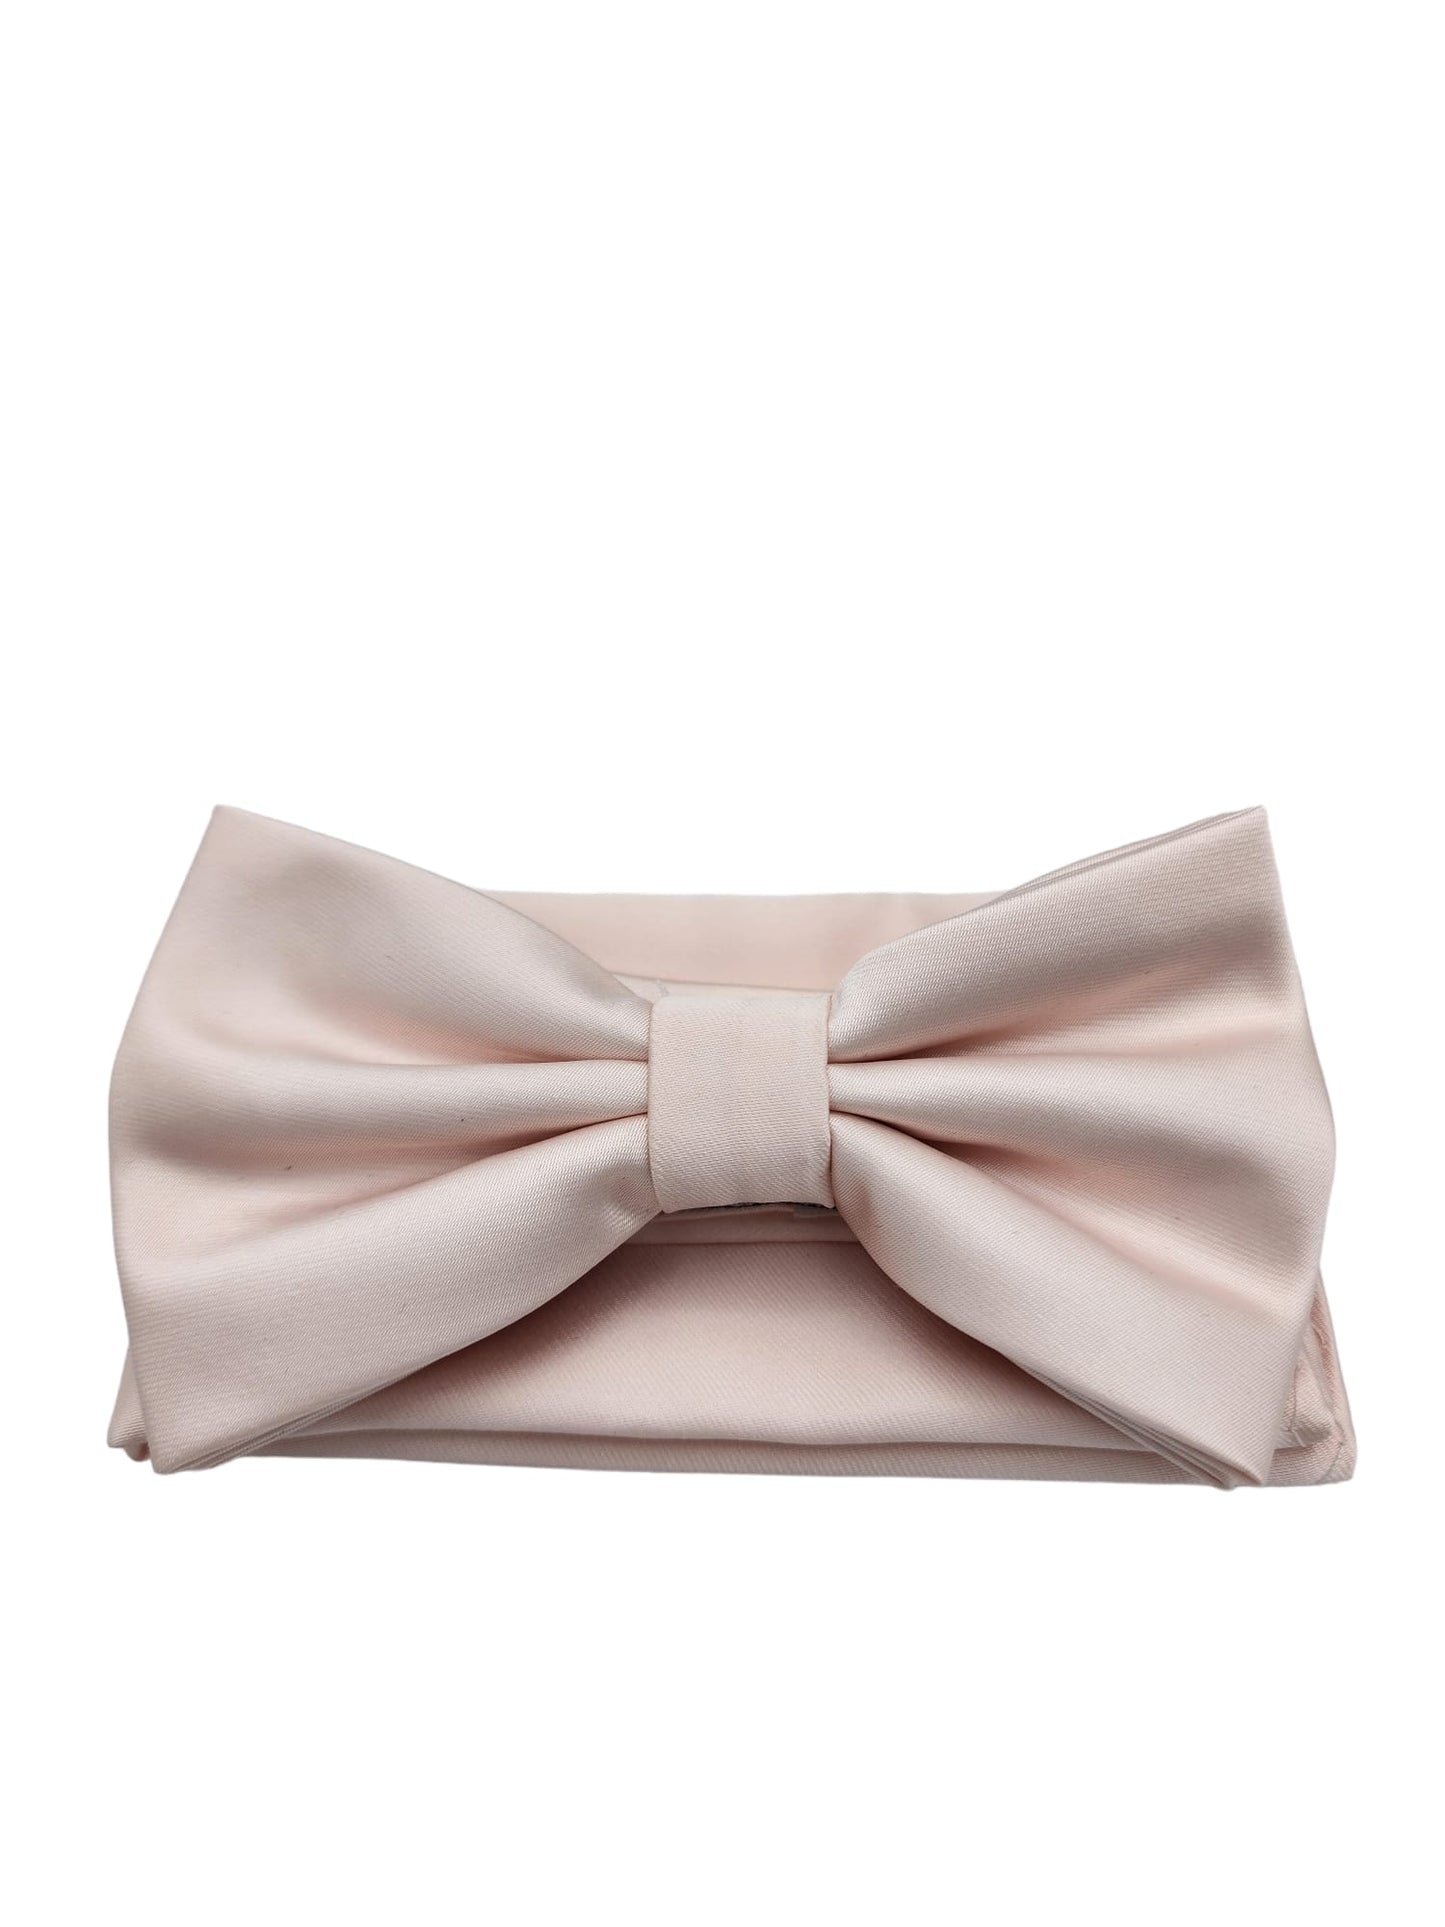 Giovanni Testi Classic Coral Bow Tie with Hanky BT100-III